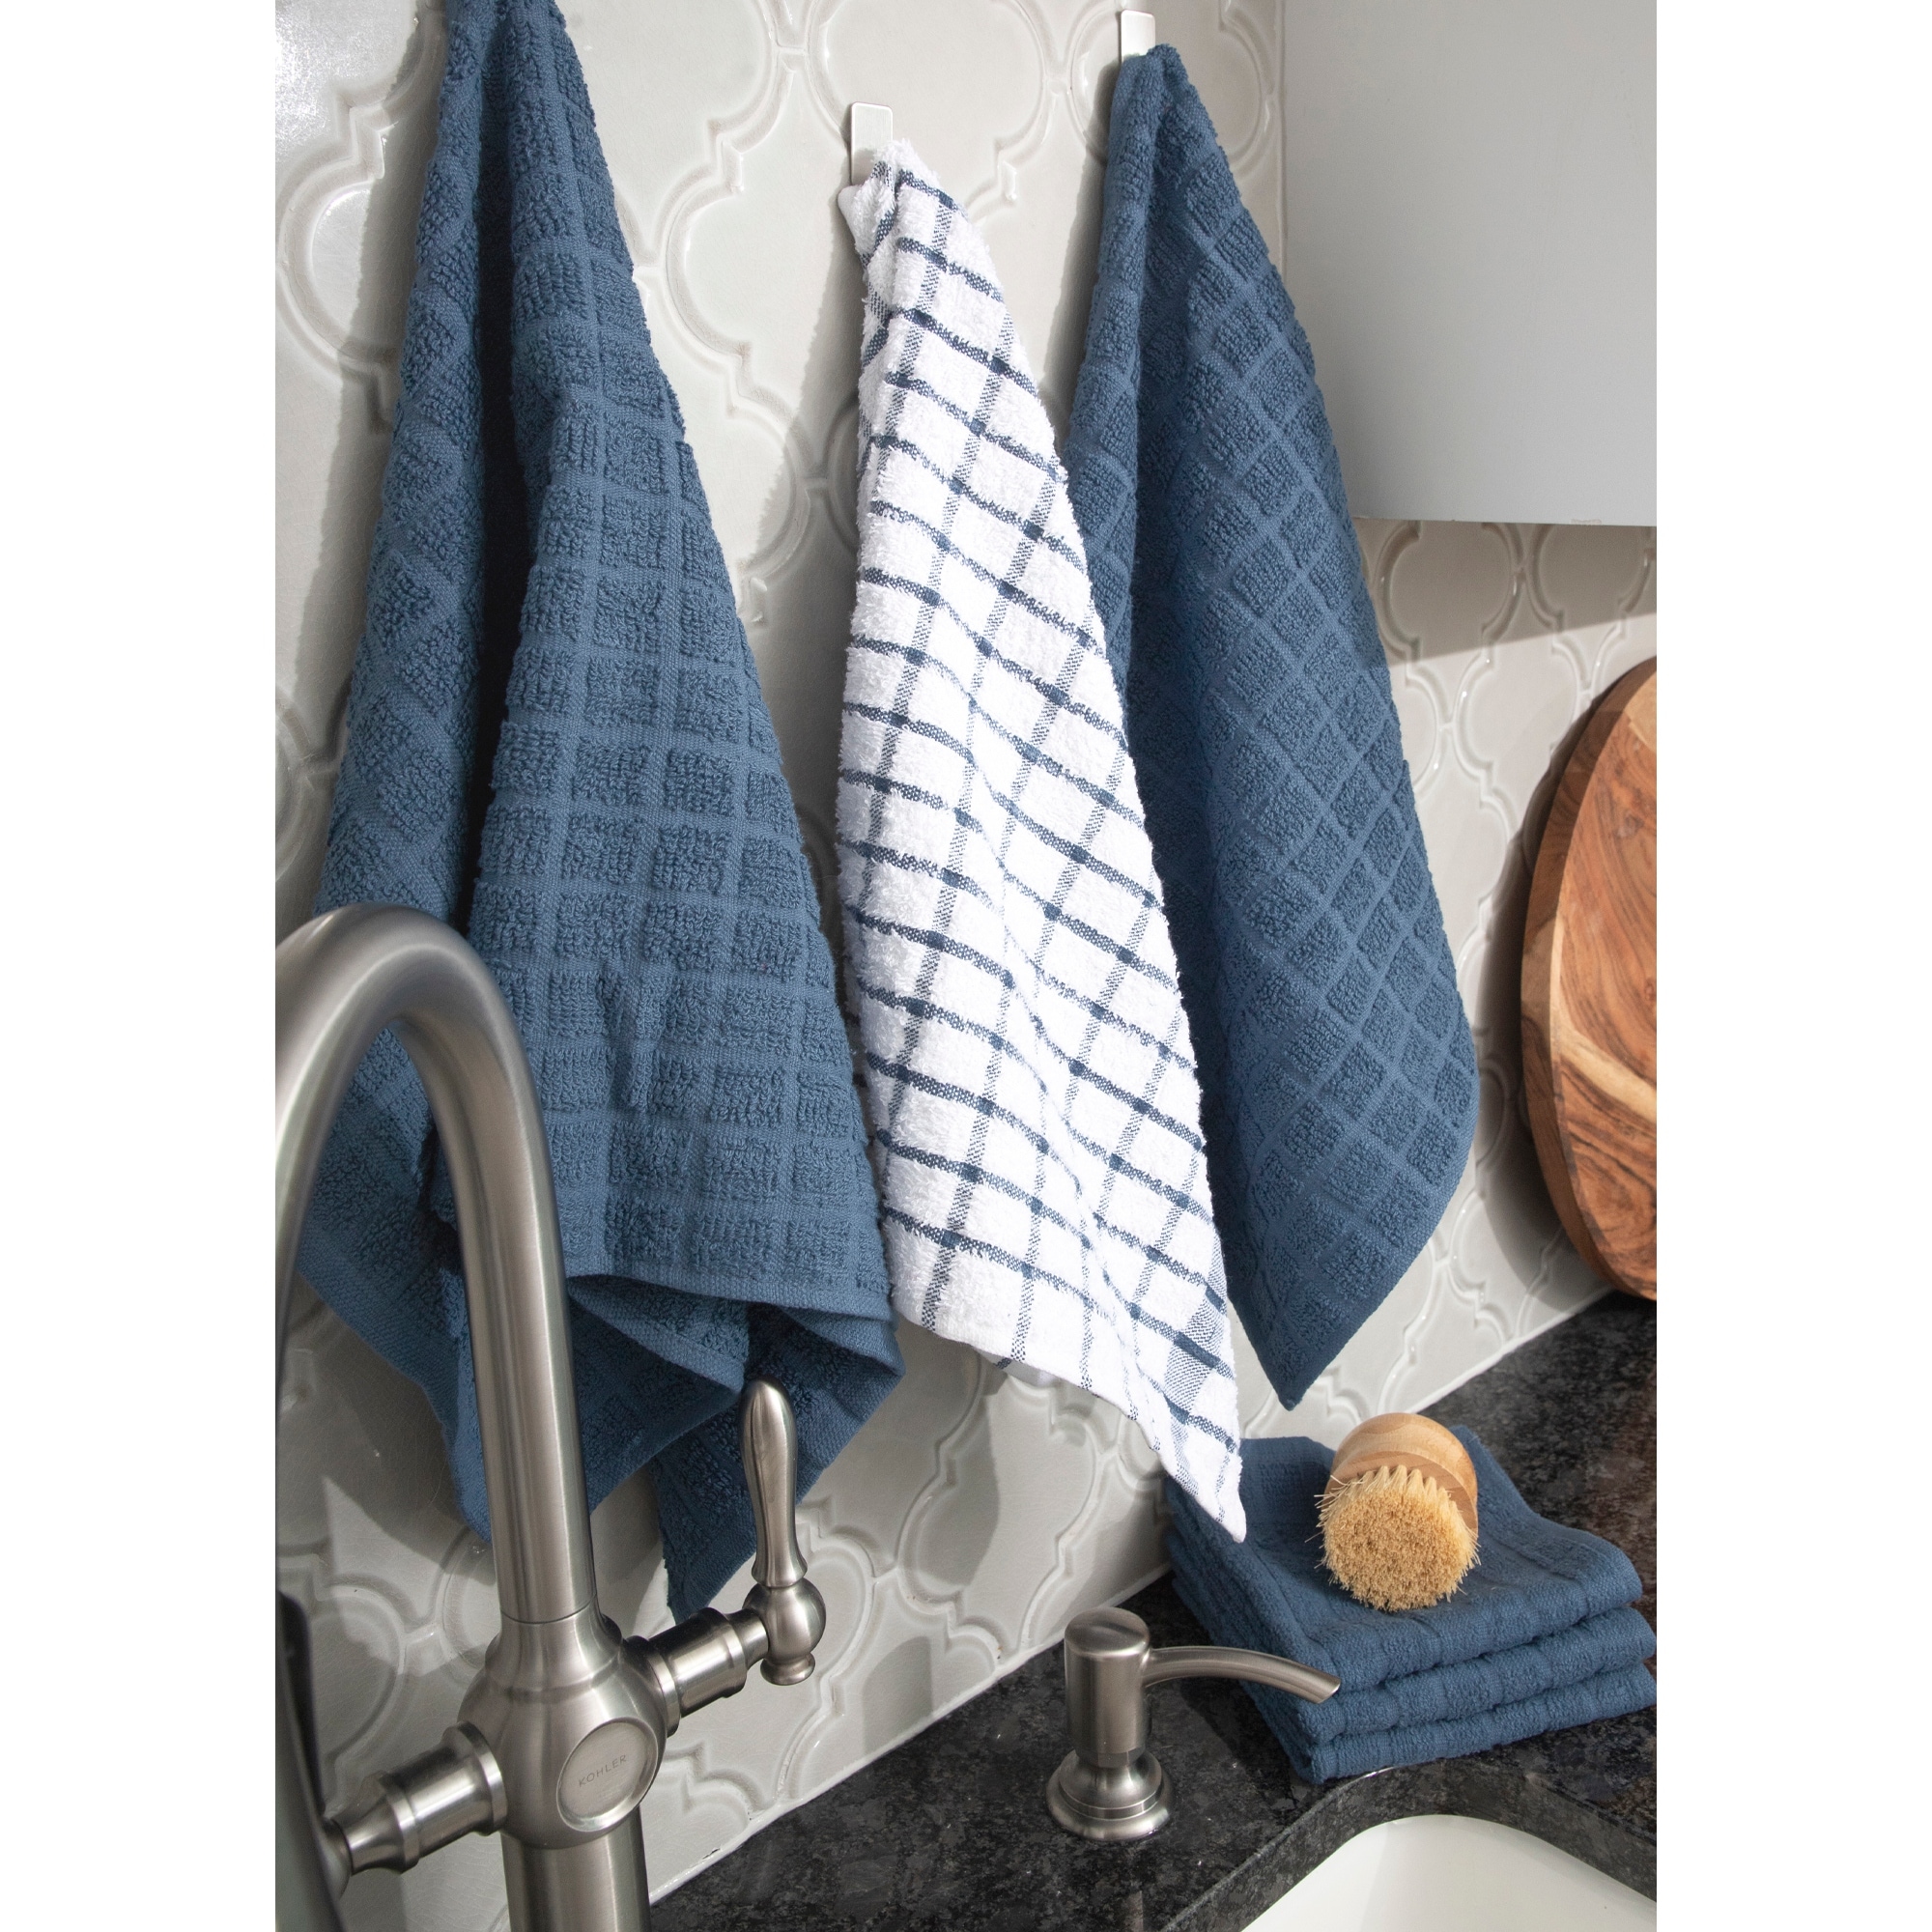 KAF Home Assorted Flat Kitchen Towels | Set of 10 Dish Towels, 100% Cotton  - 18 x 28 inches | Ultra Absorbent Soft Kitchen Tea Towels (Teal)